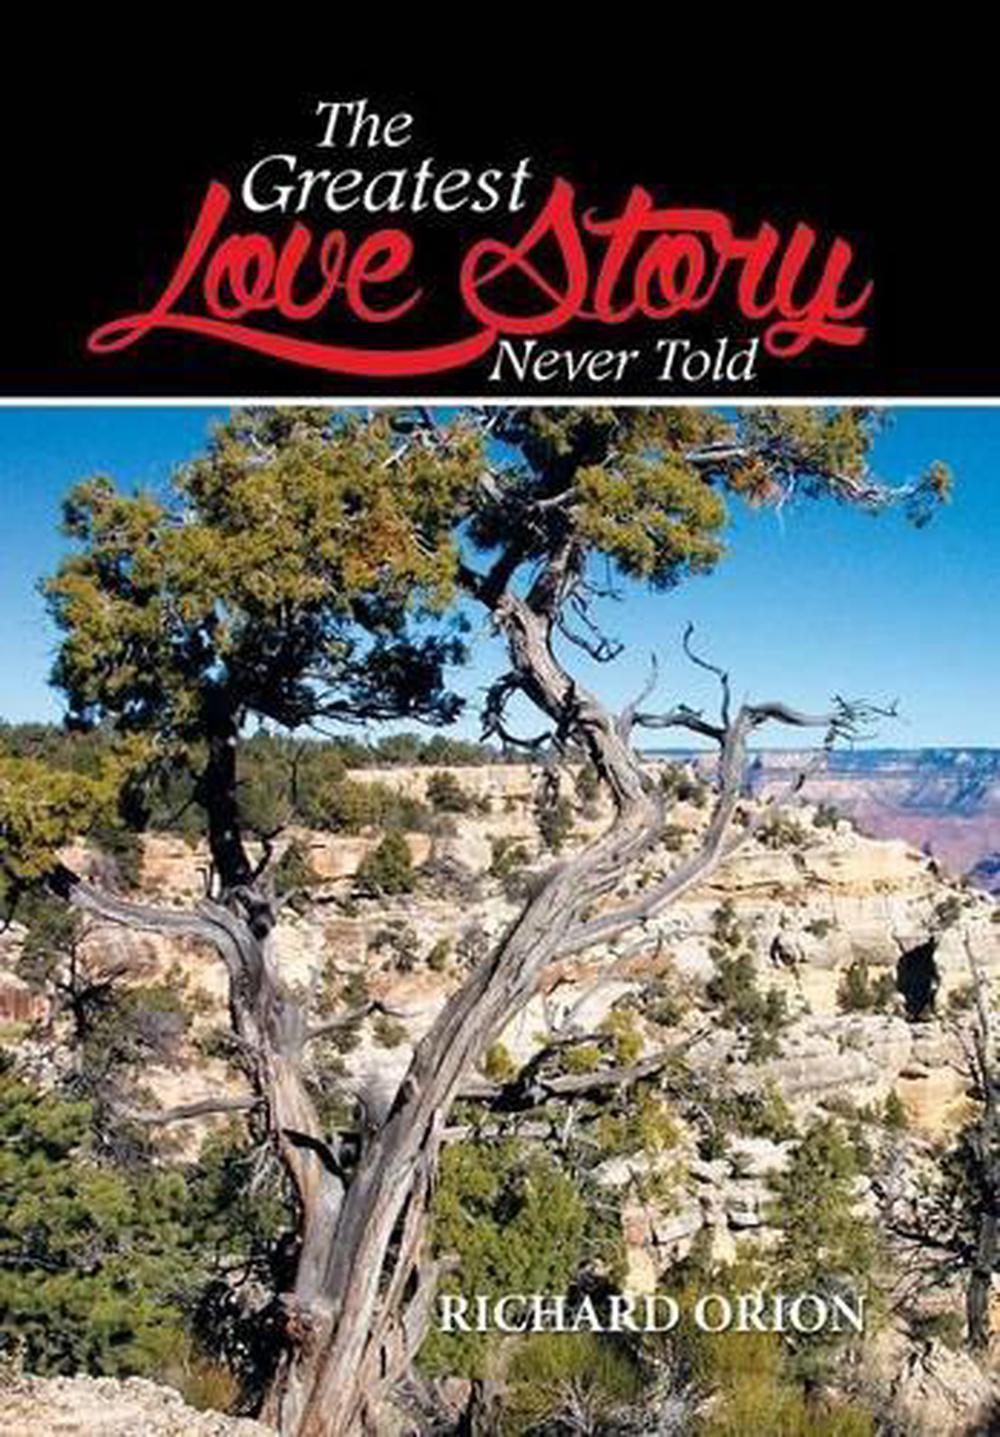 The Greatest Love Story Never Told by Richard Orion (English) Hardcover